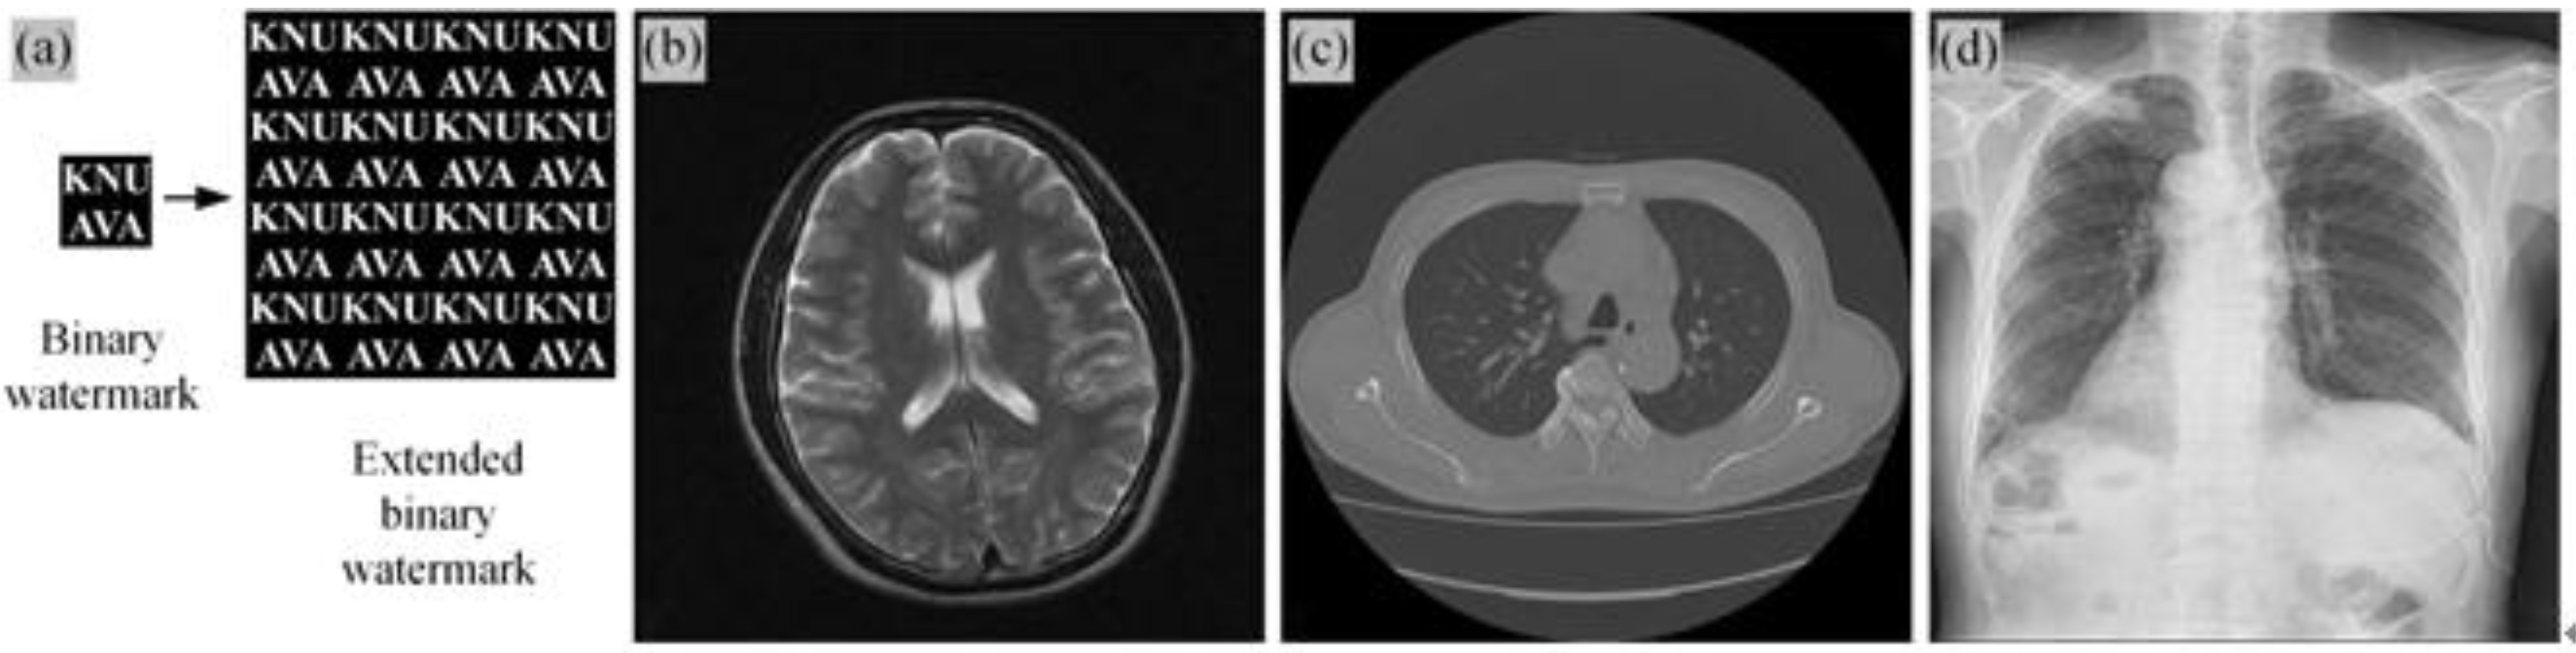 Example of the proposed watermark generation method and selected medical images in the simulation: (a) watermark generation and (b) MRI, (c) CT, and (d) X-ray images.